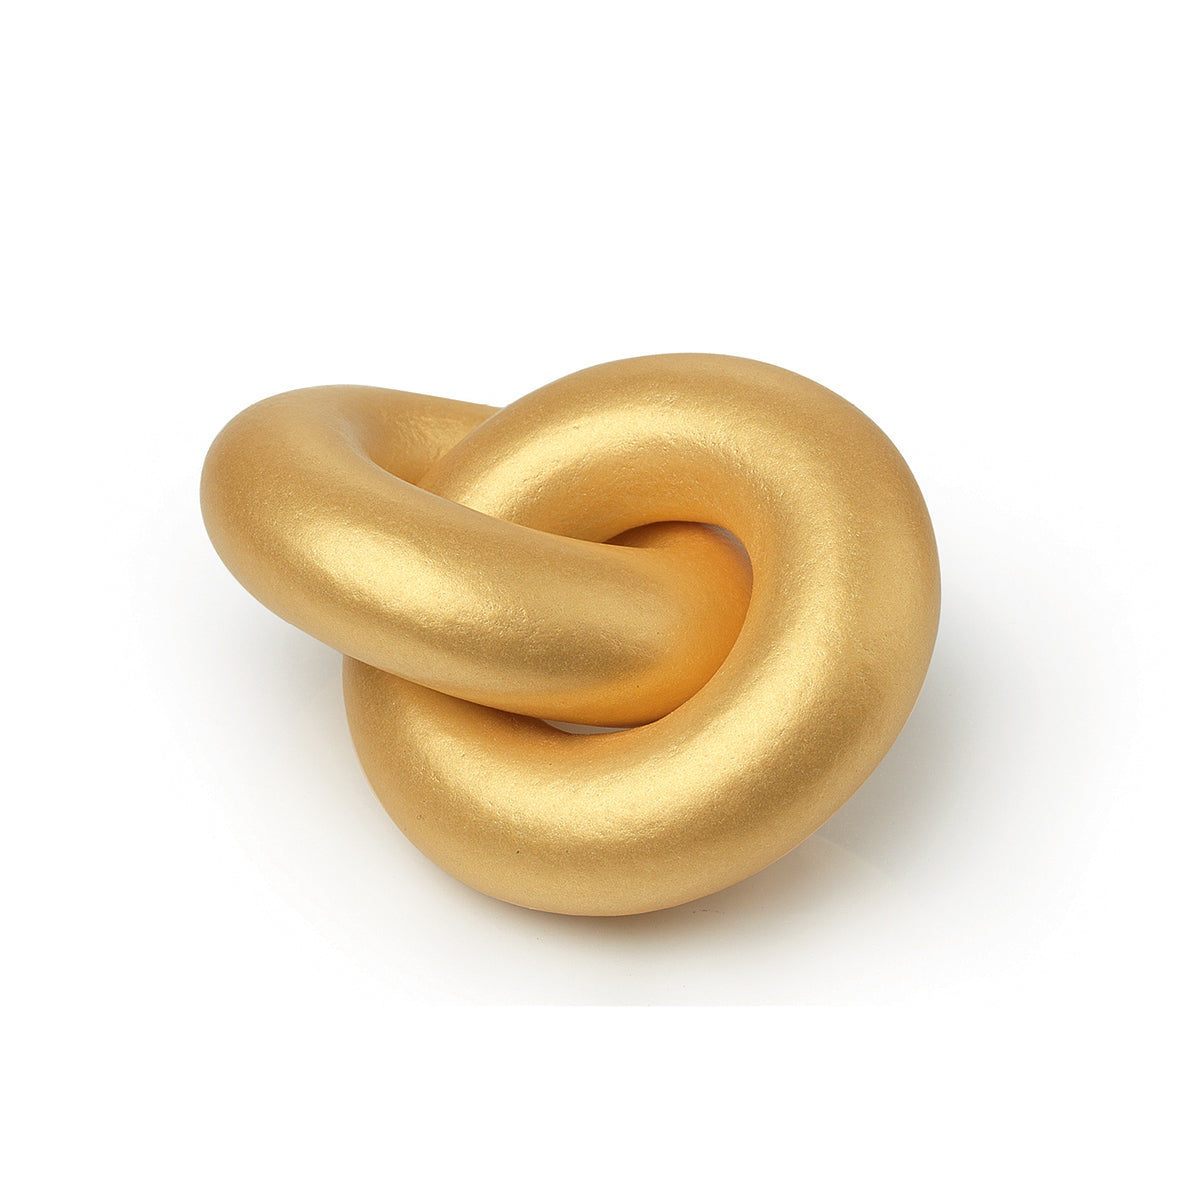 Gold Rings Dragees CK Products Non-Edible Toppers - Bake Supply Plus